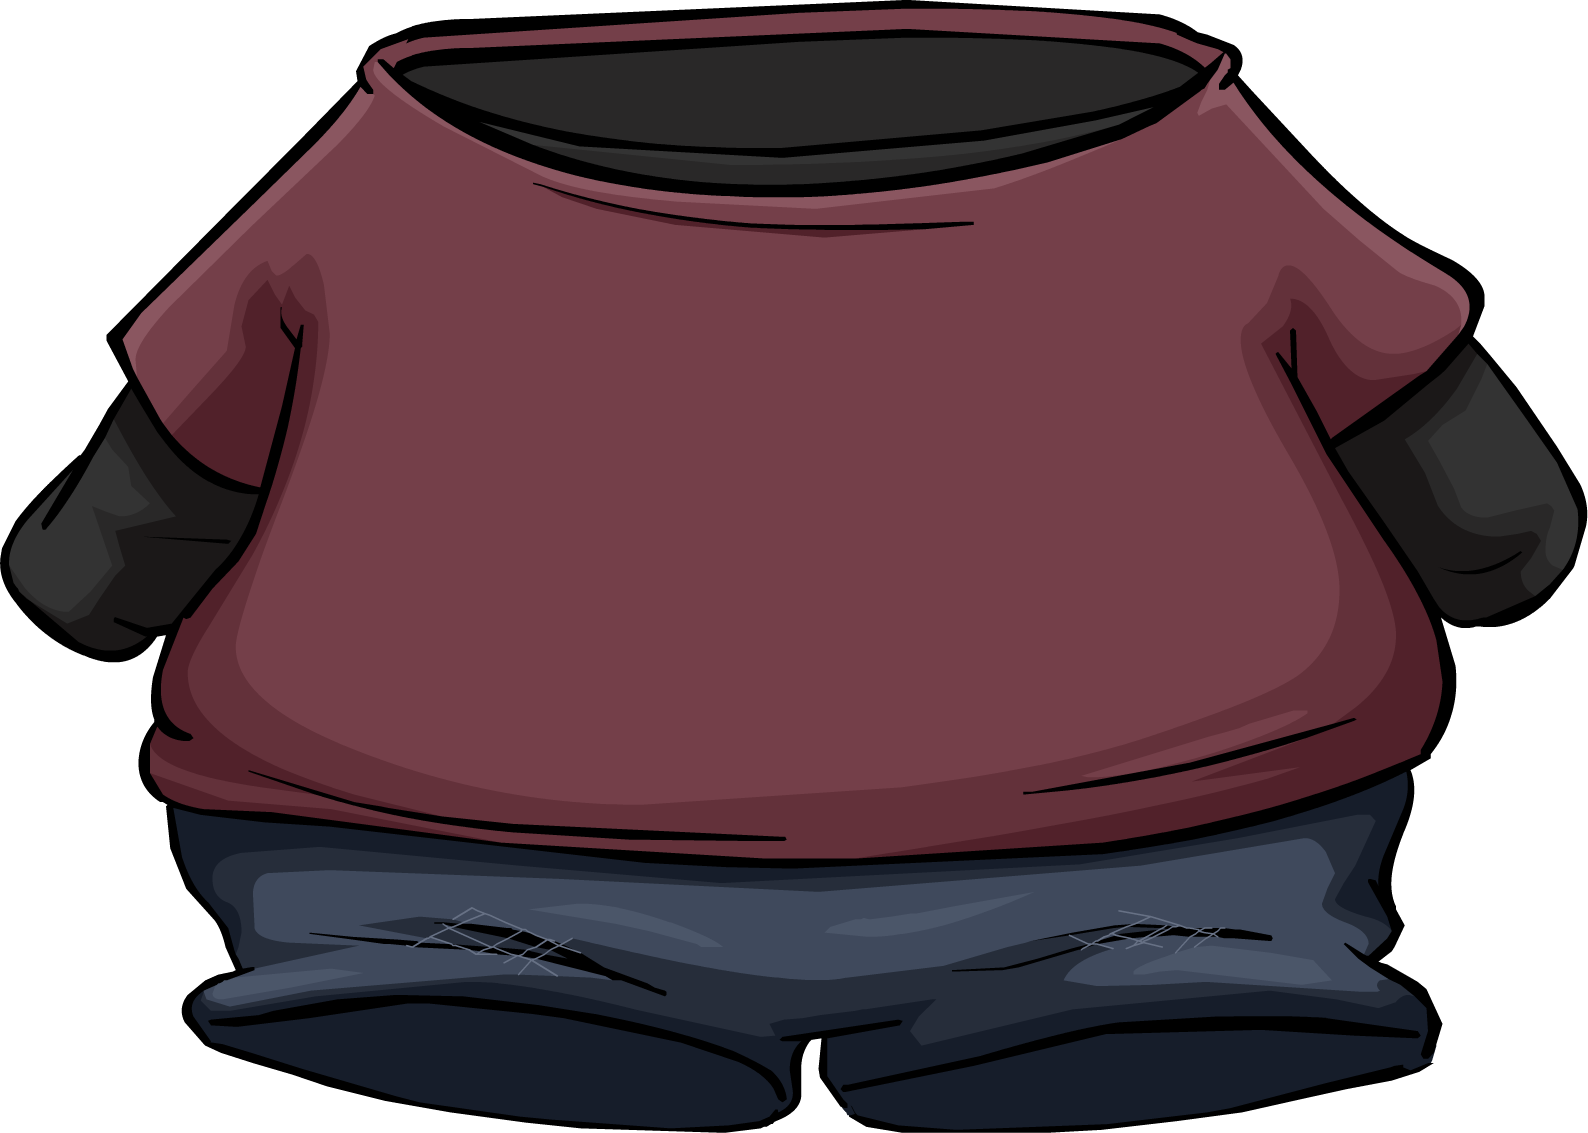 Red Undercover Shirt - Club Penguin Red Shirt (1588x1133)